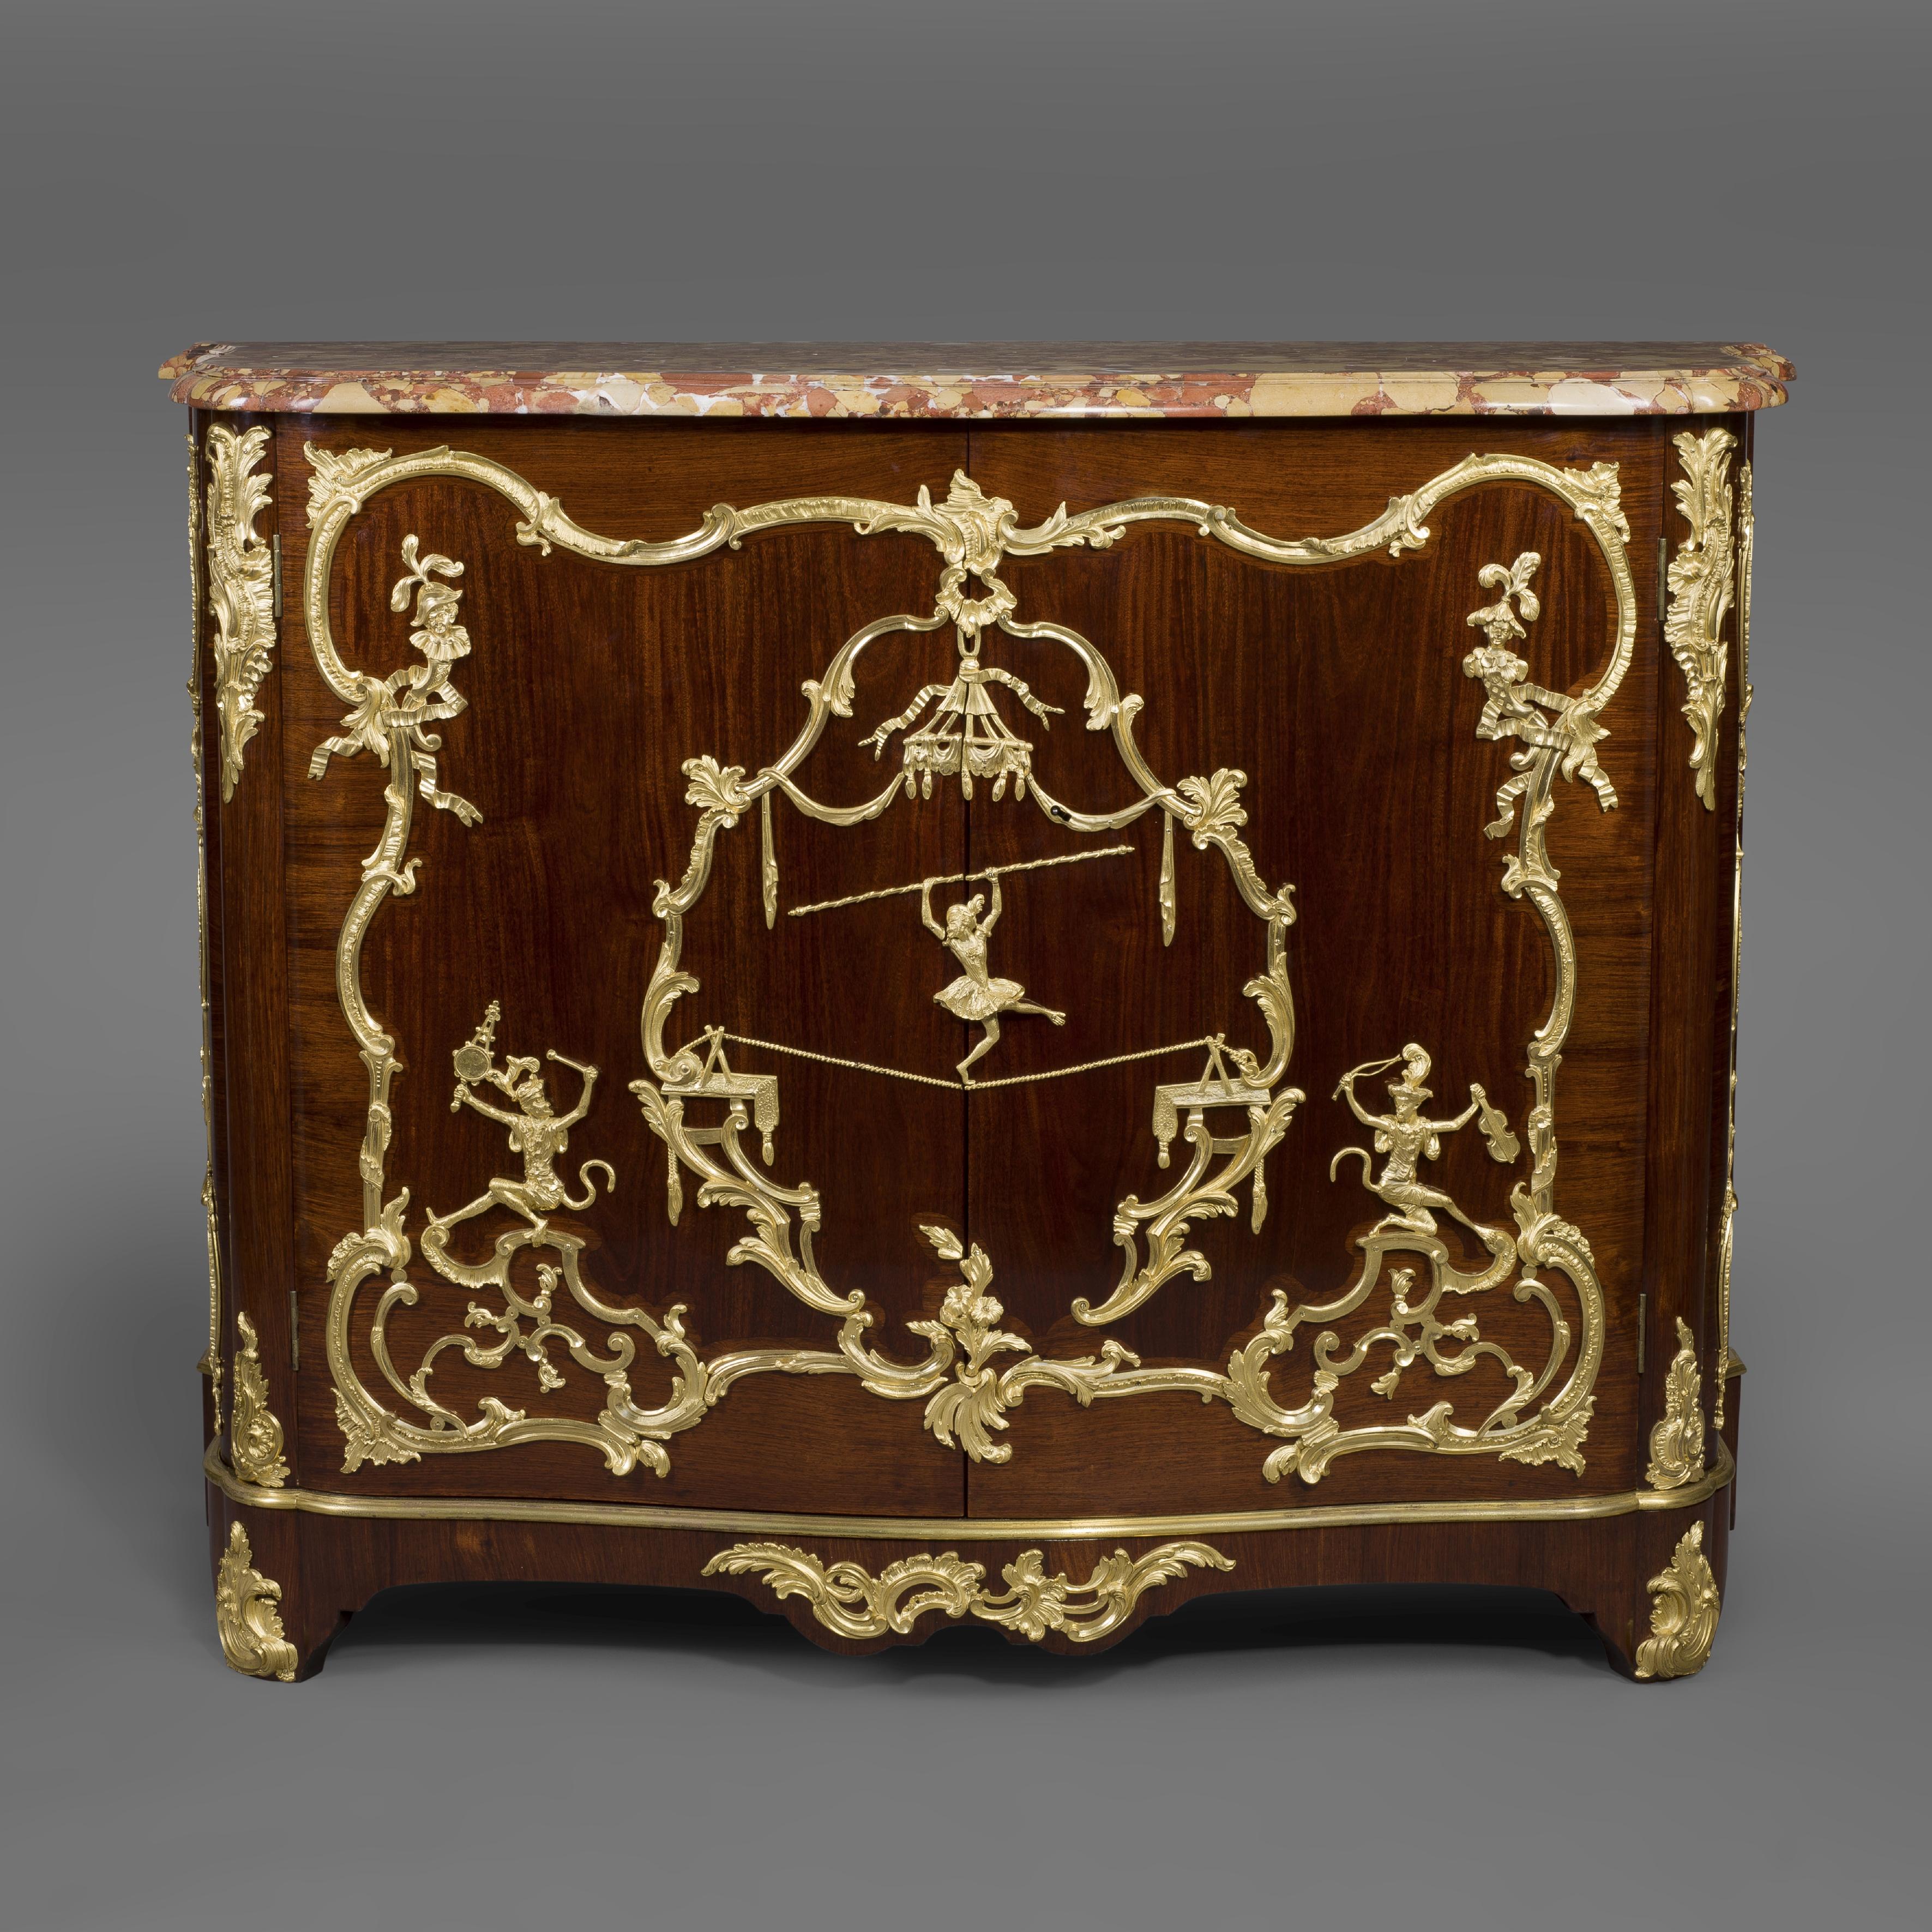 A fine Louis XV style gilt-bronze Mounted Mahogany side-cabinet in the manner of Charles Cressent, Attributed to François Linke.

This fine side cabinet or 'Bas d'Armoire aux singes' has a Brèche d’Alep marble top above a pair of cupboard doors